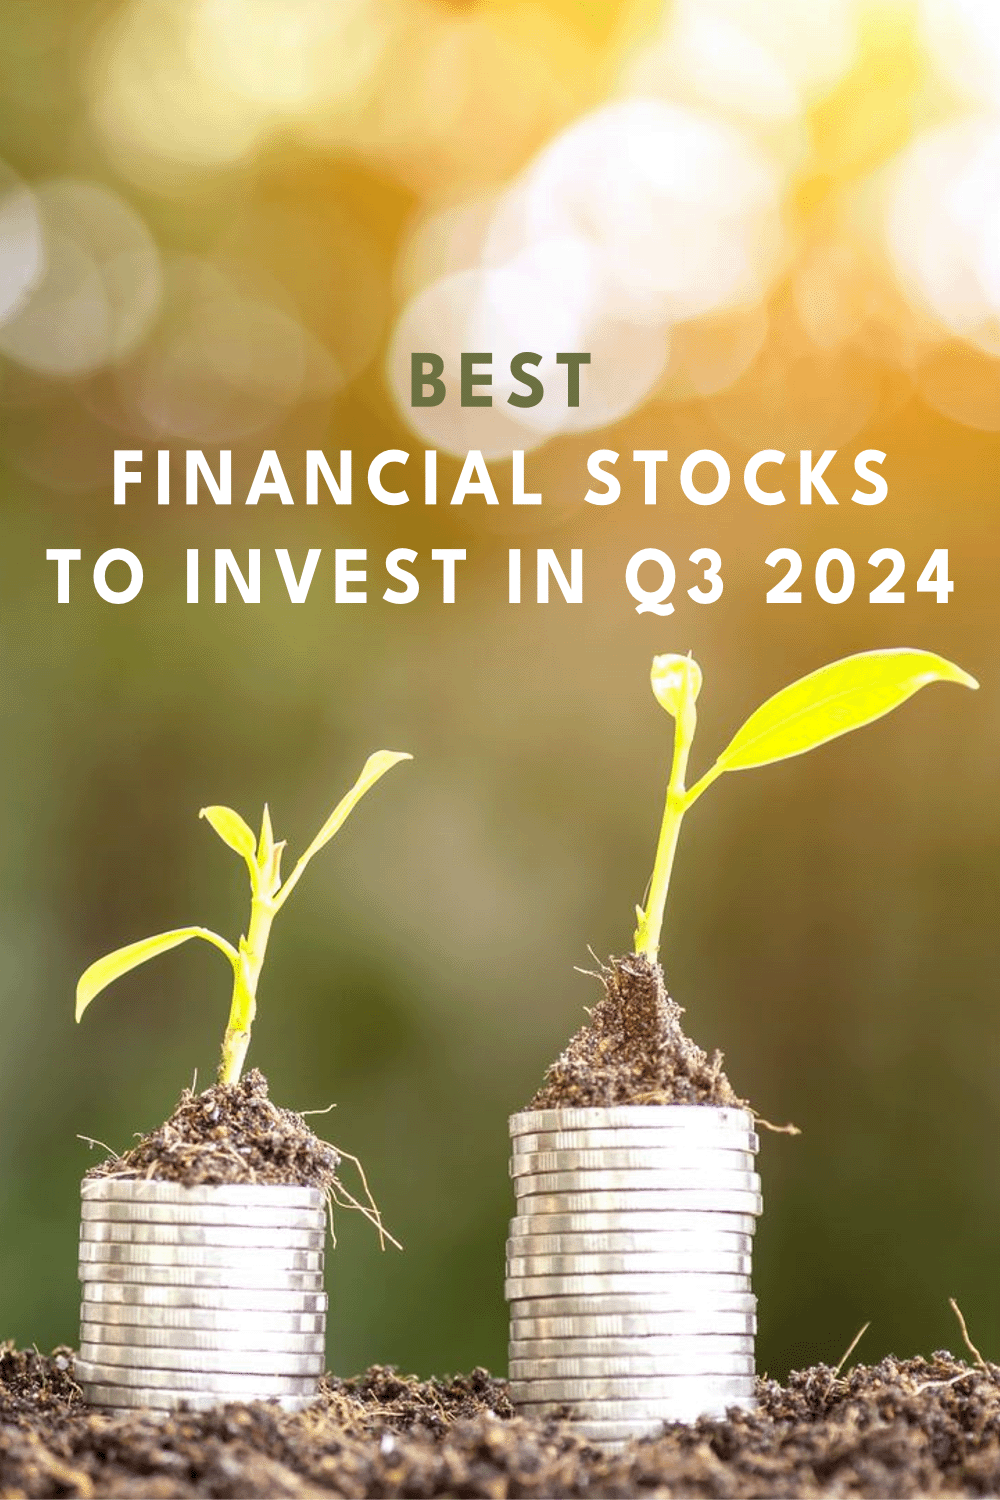 Best financial stocks to invest in Q3 2024